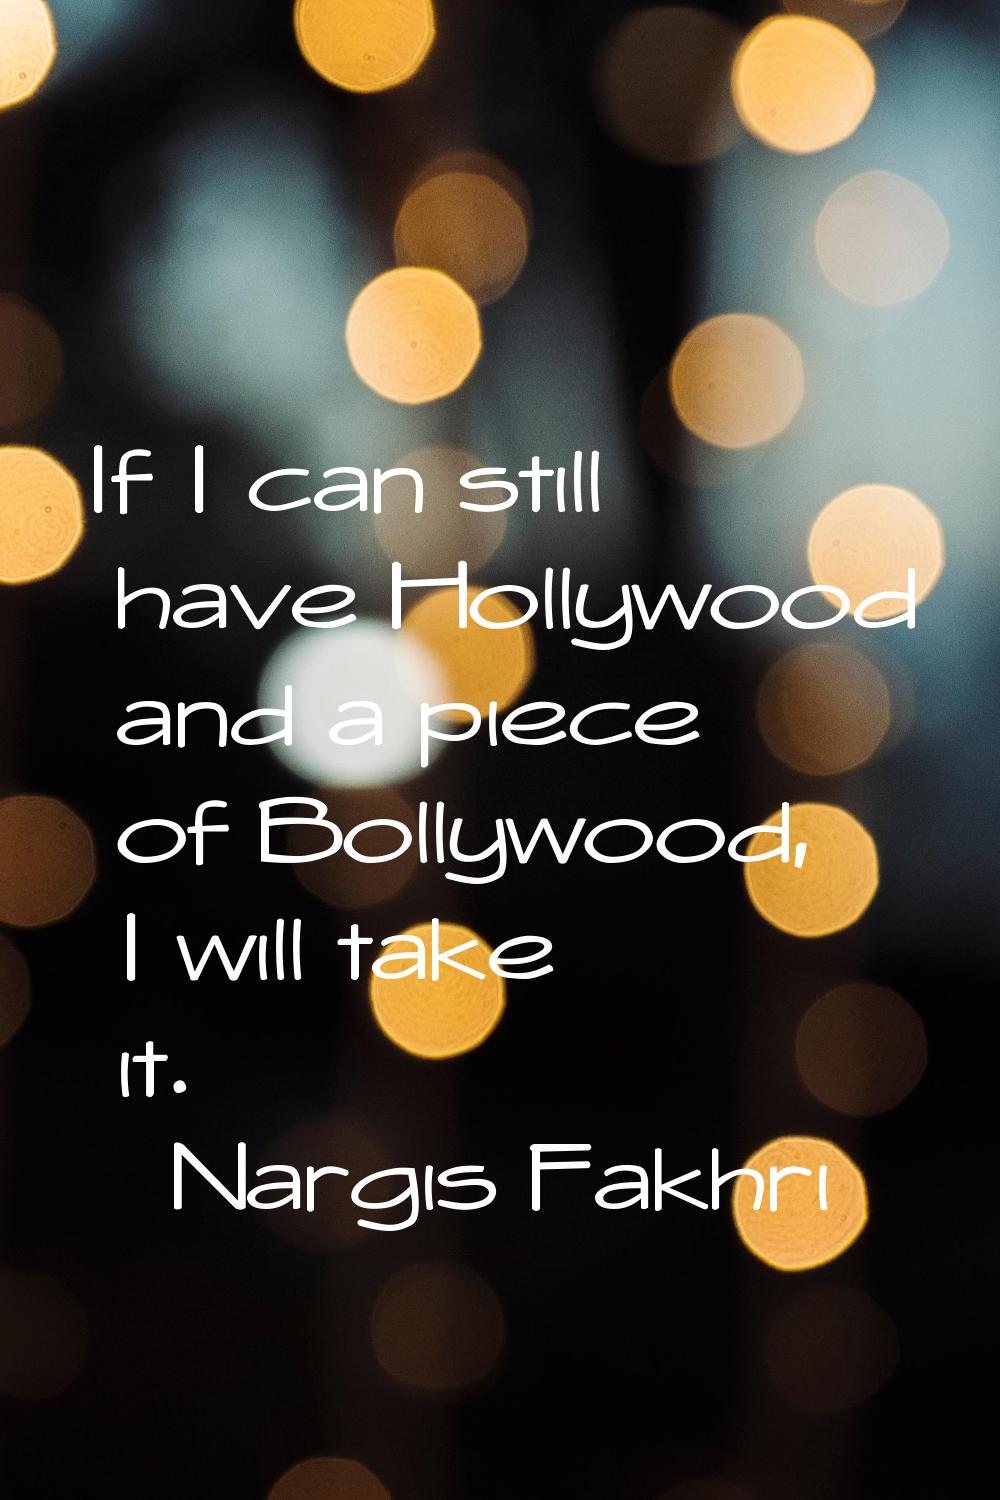 If I can still have Hollywood and a piece of Bollywood, I will take it.